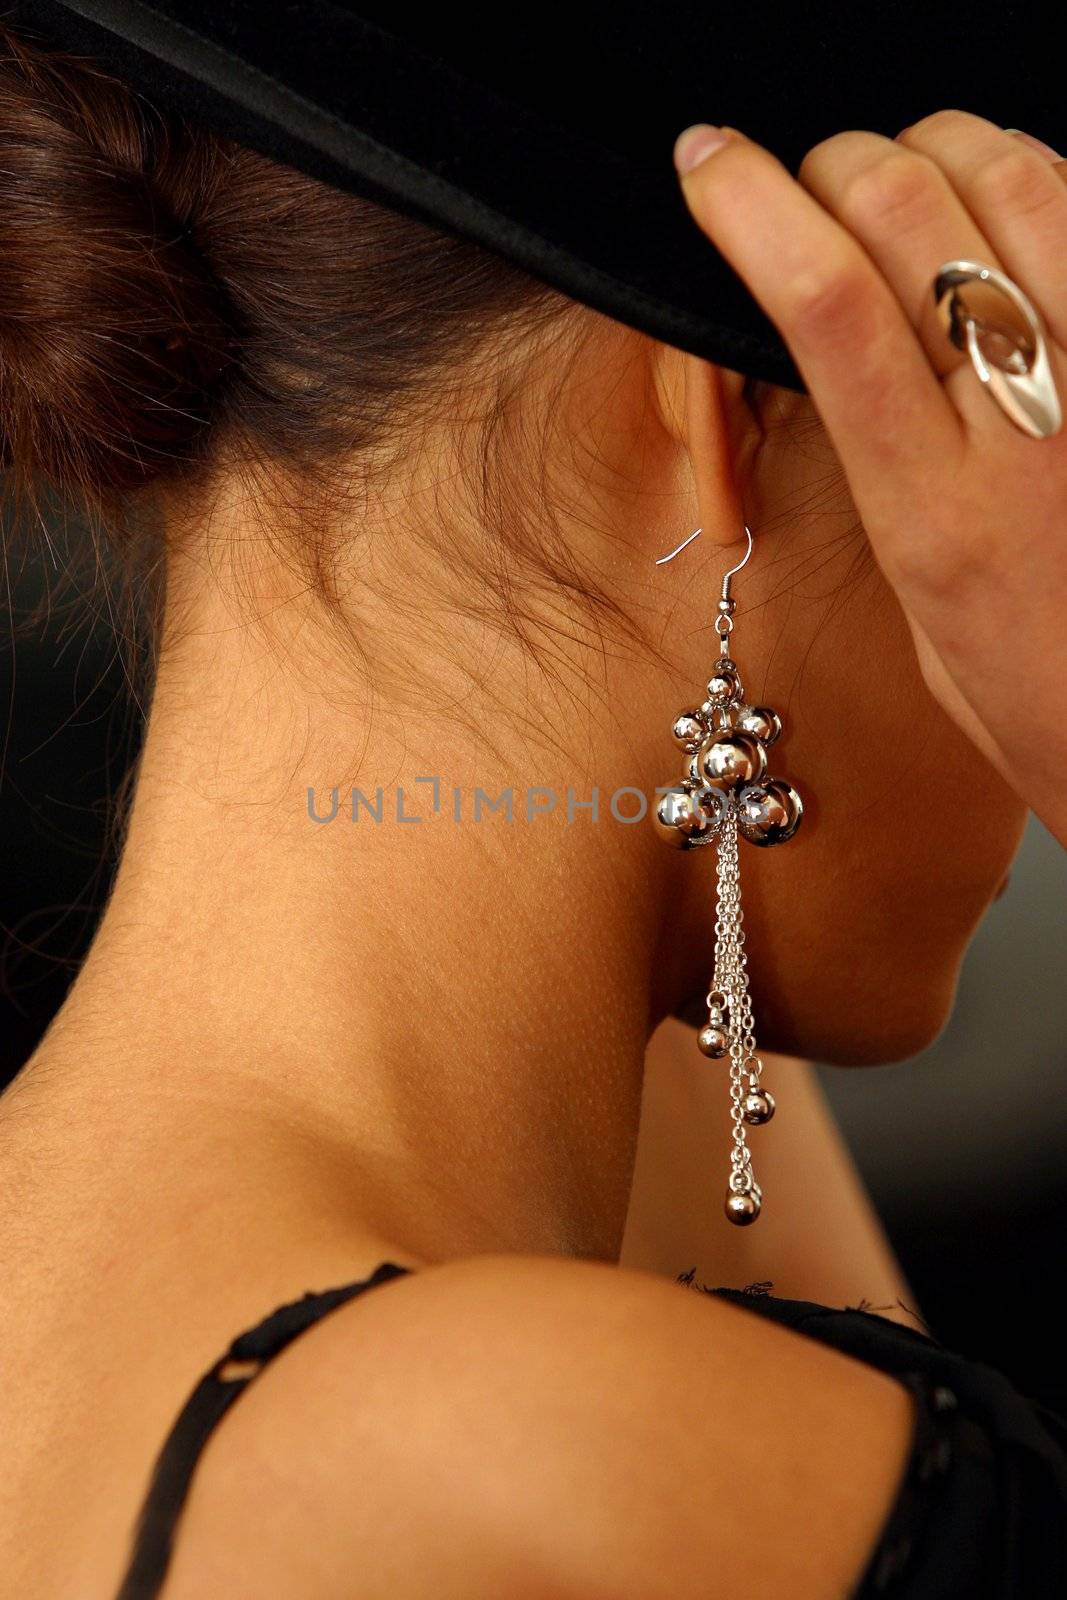 The image of the girl in rings and ear rings putting on a hat